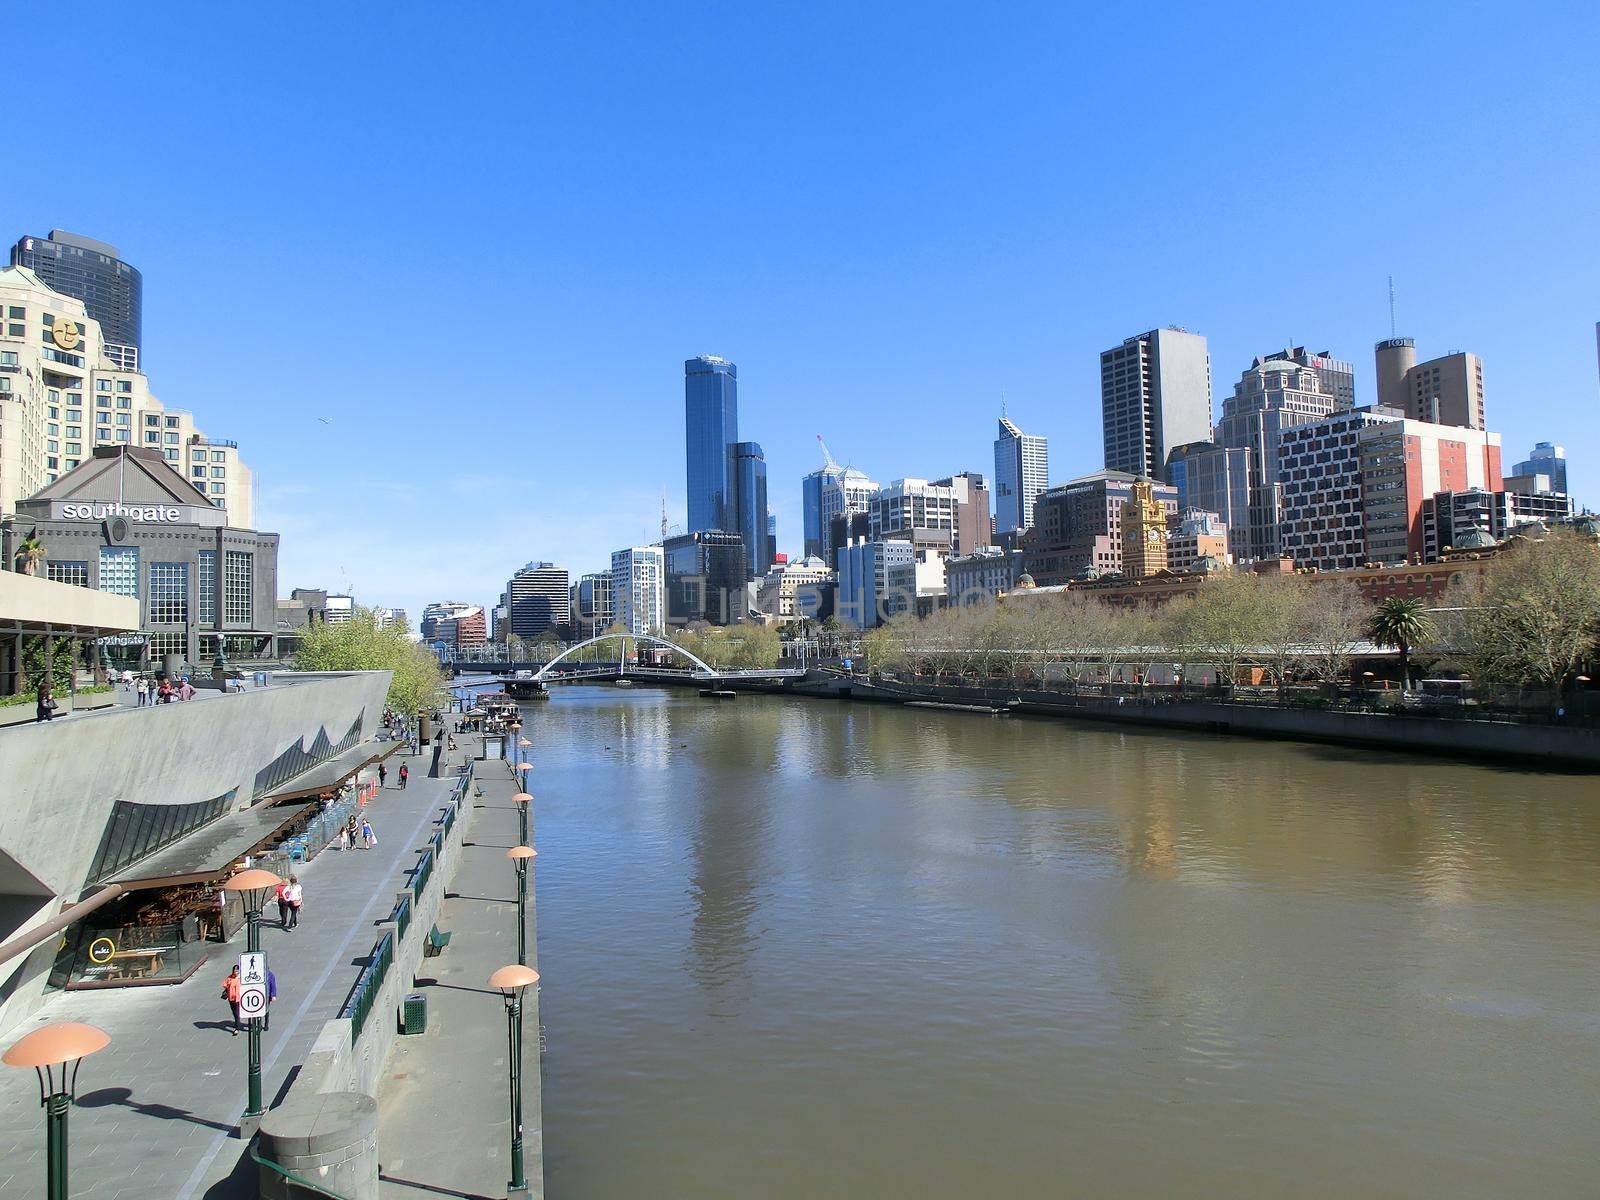 A view of the Yarra River on a sunny day, Melbourne, Victoria, Australia